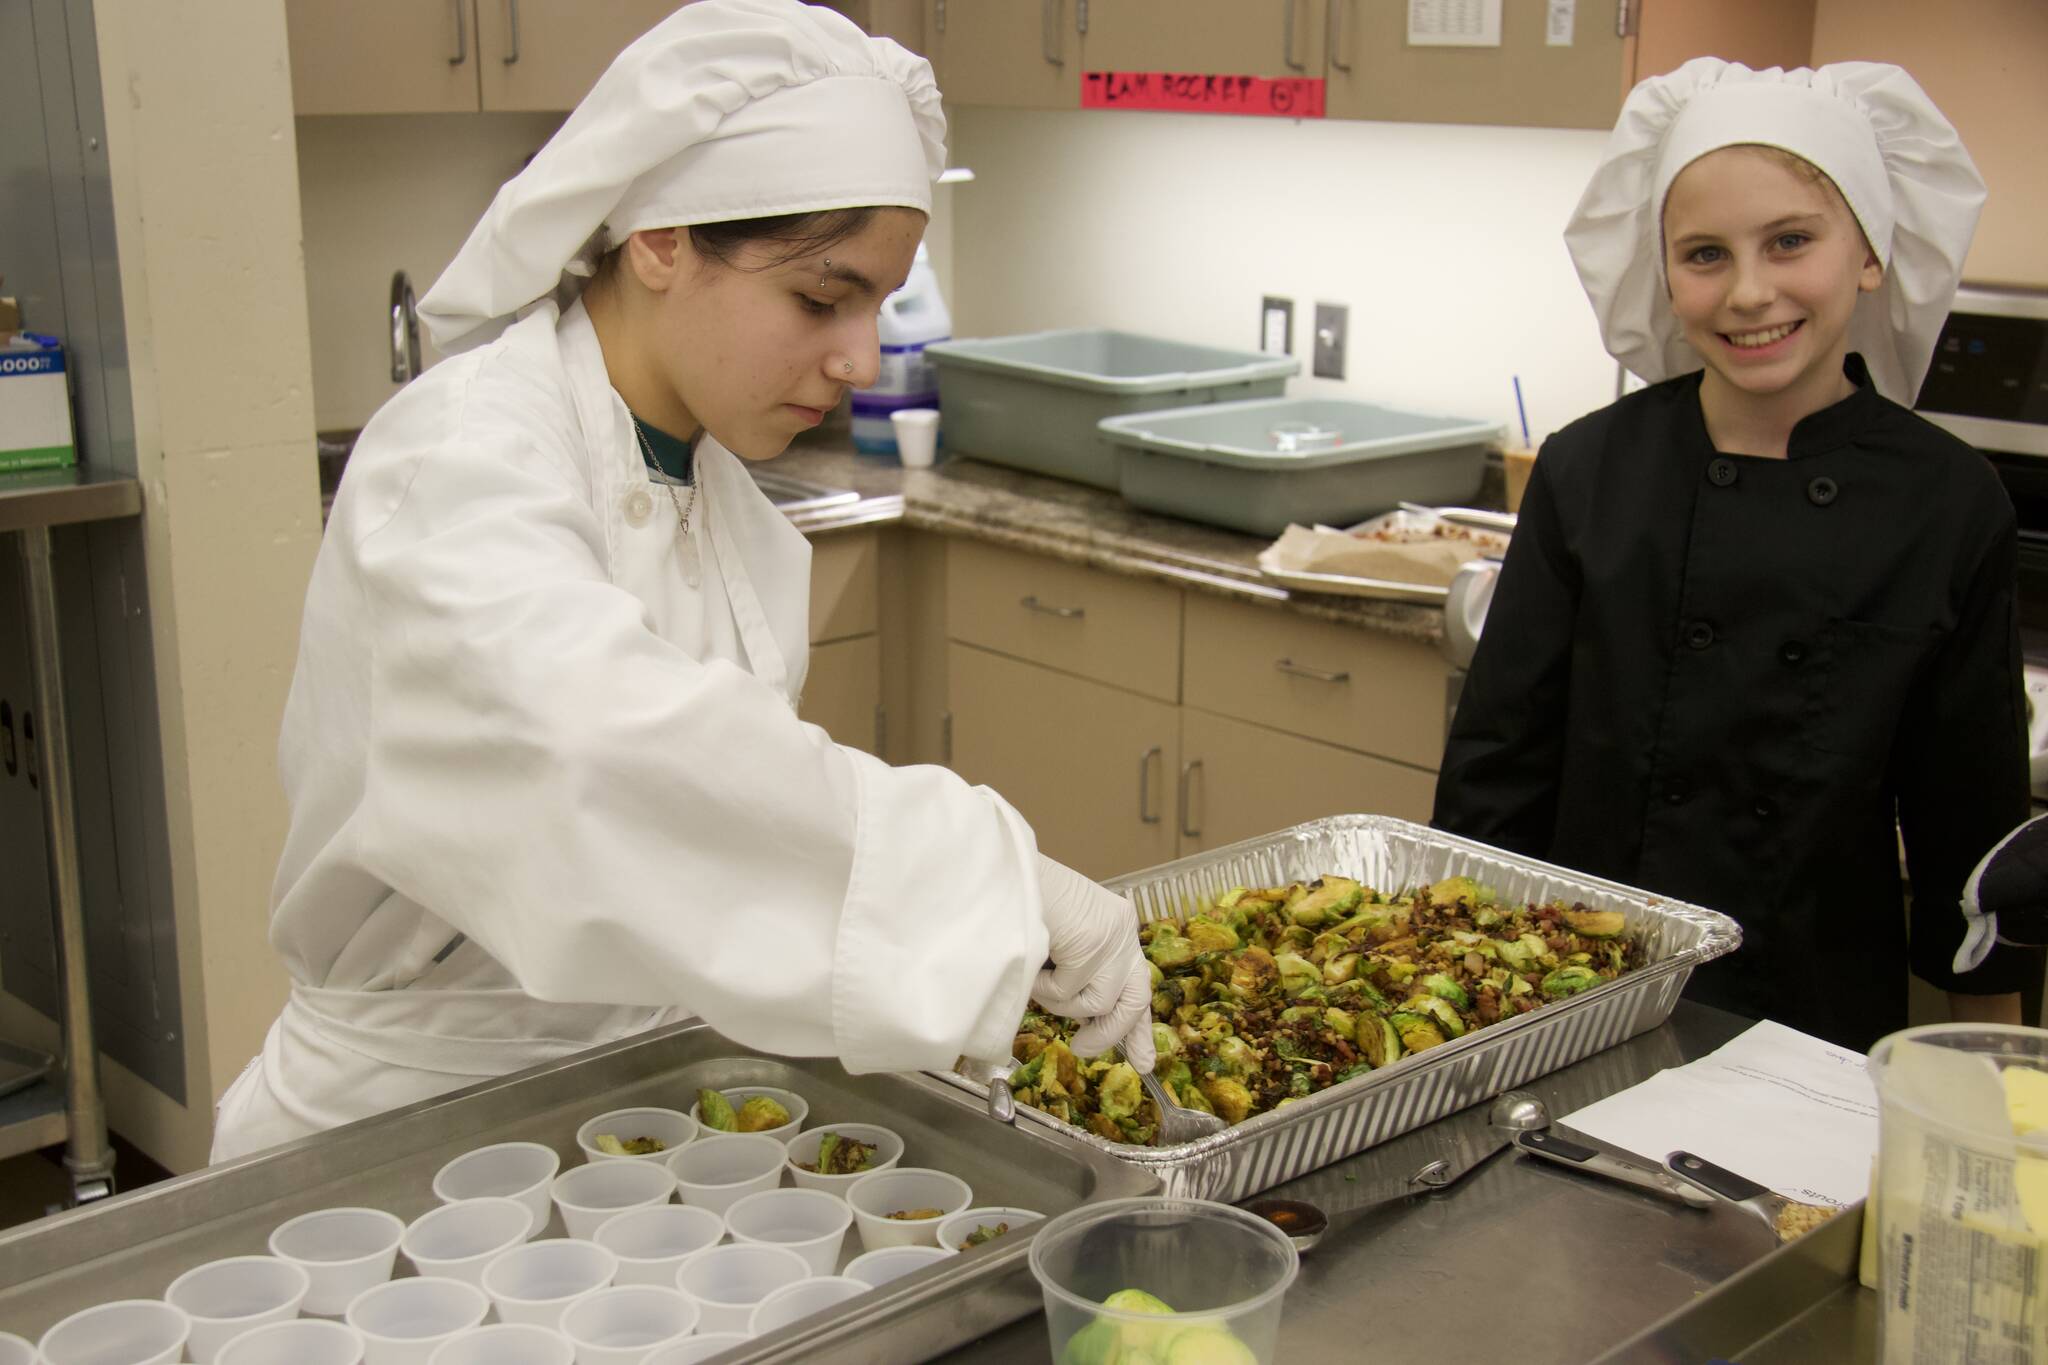 High school student Elizabeth Brennan (right) assist Madilyn Jones in preparing her Brussels sprouts dish. (Photo by Rachel Rosen/Whidbey News-Times)